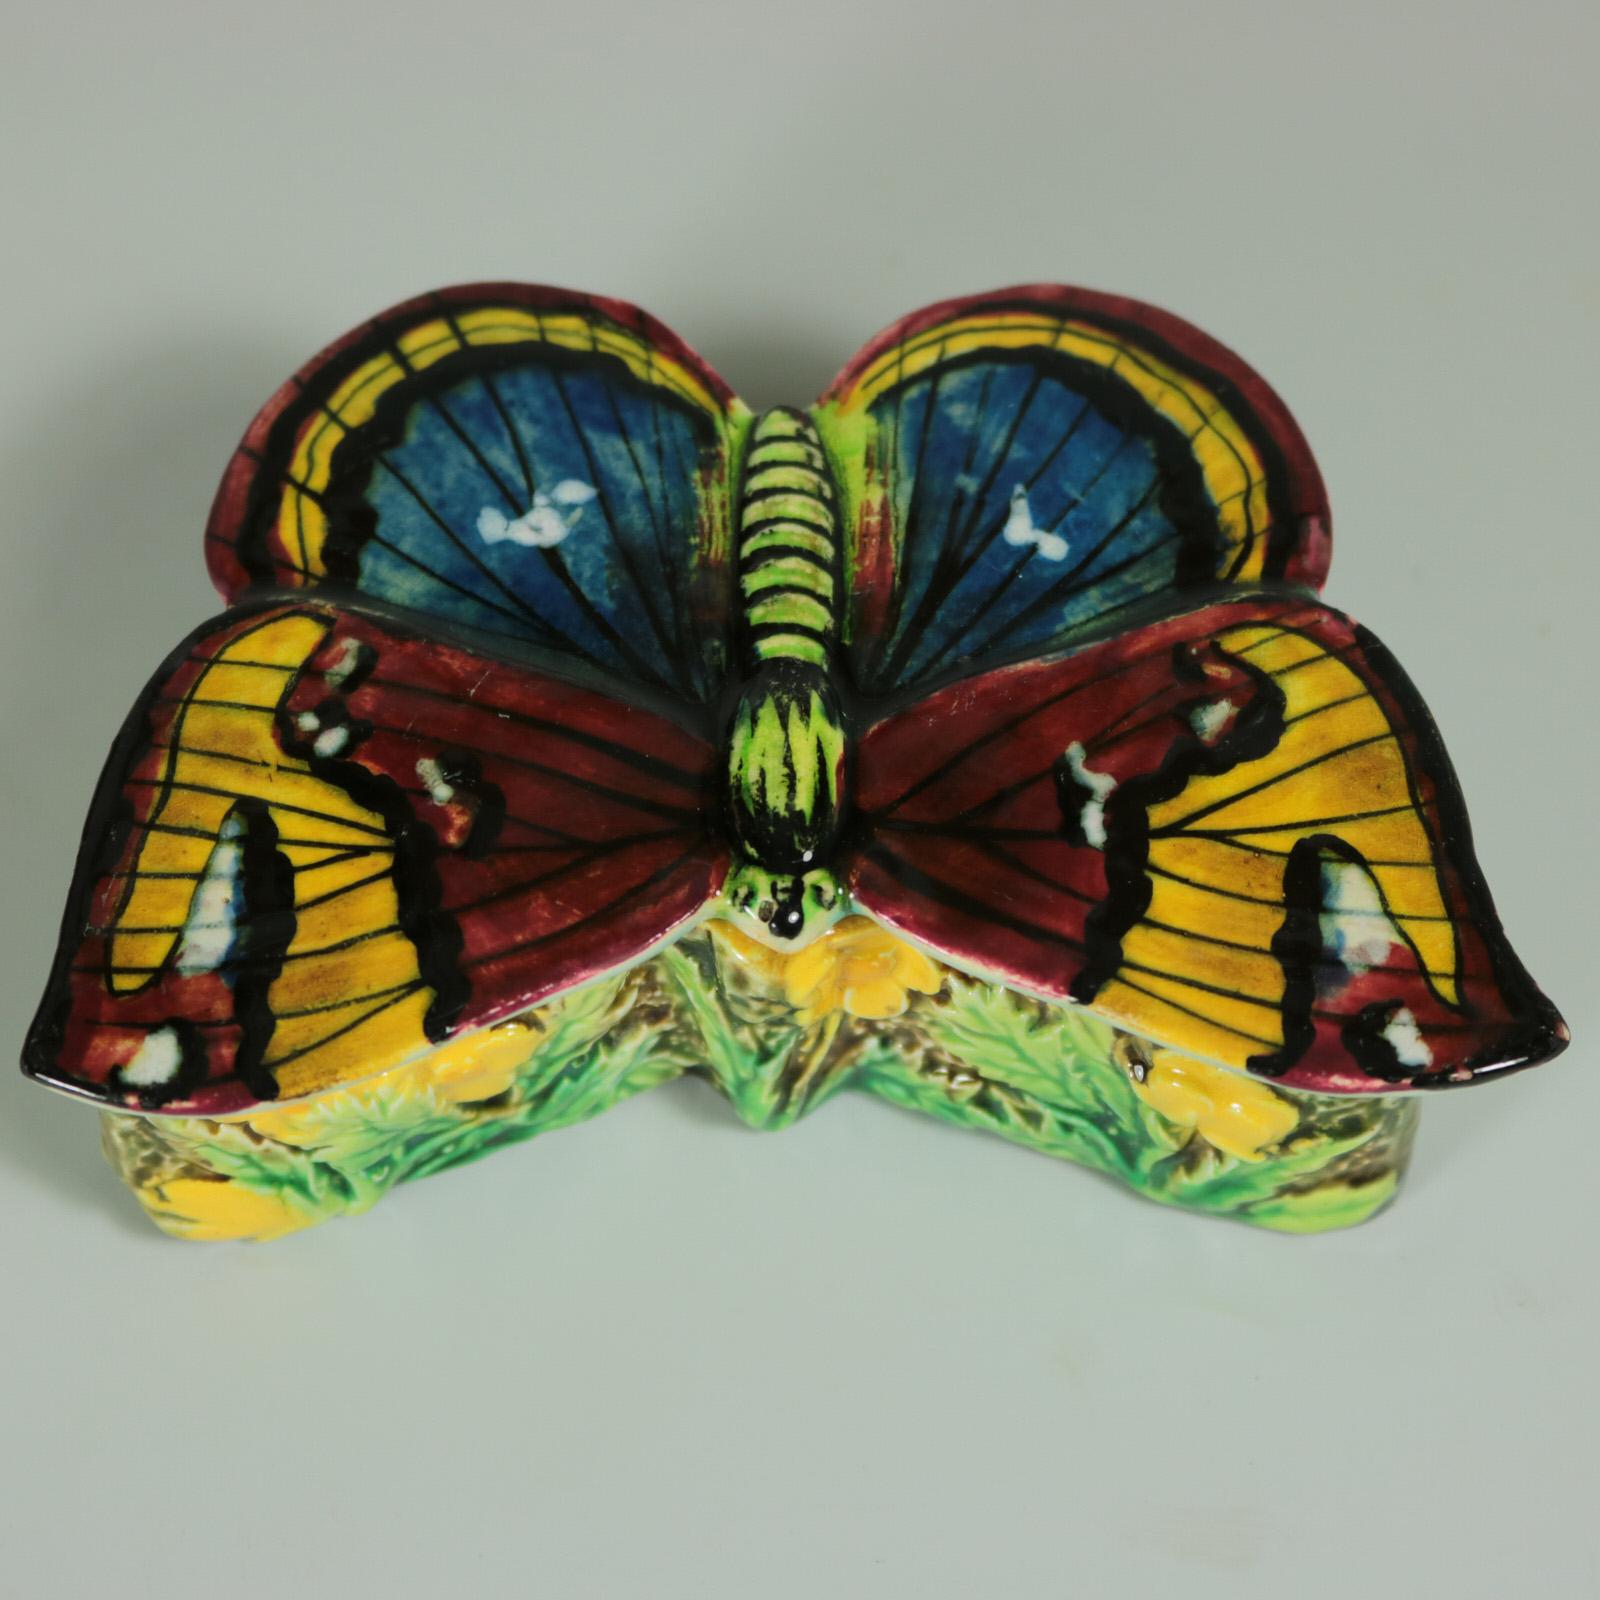 George Jones Majolica match box which features a butterfly forming the removable lid. The base is embellished with buttercups around the sides. Colouration: scarlet, yellow, blue, are predominant. English diamond registration mark for the date